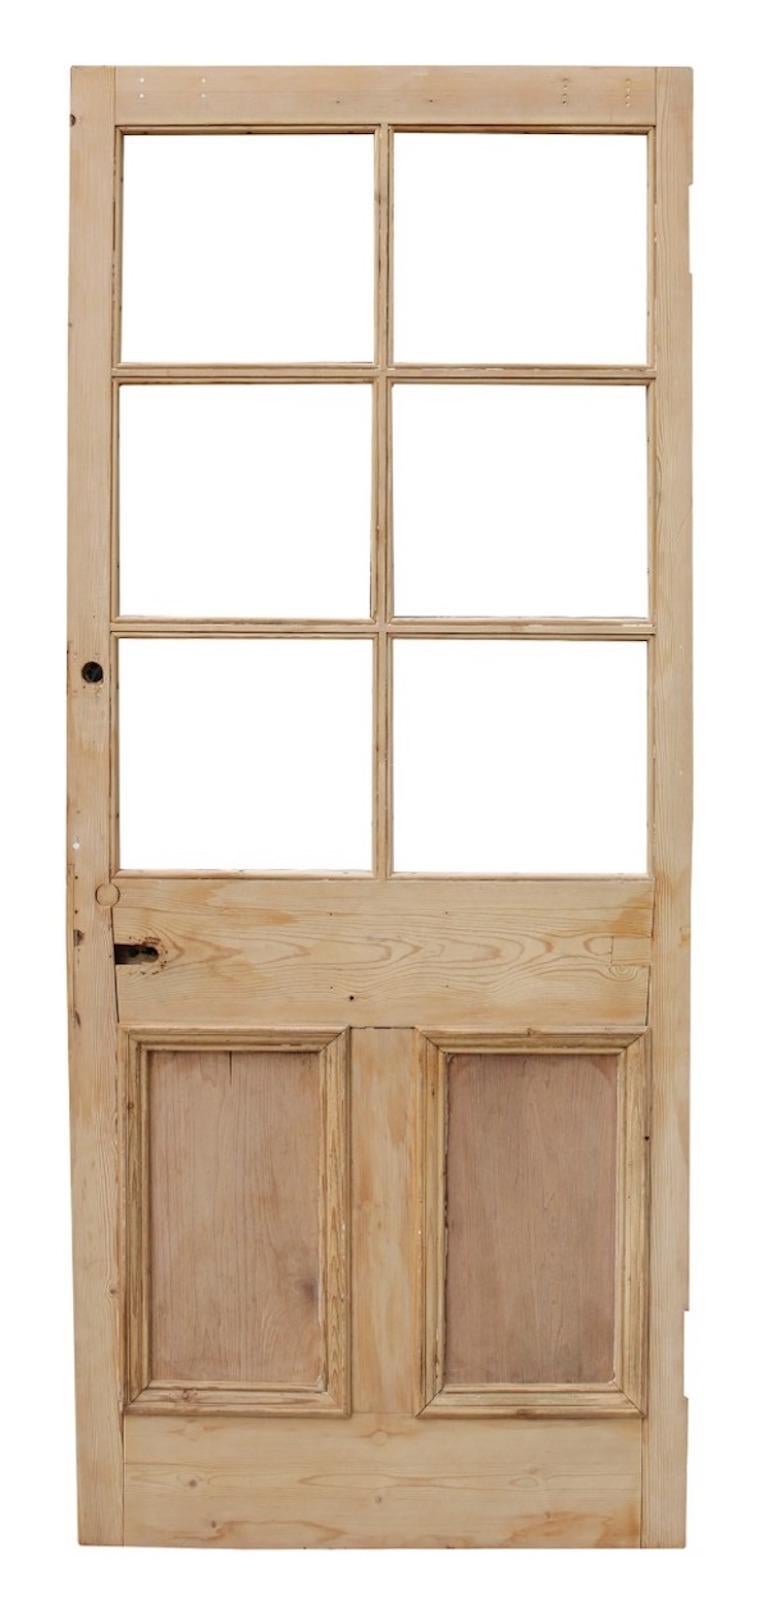 A reclaimed door constructed from pine, with space for six panes of glass.